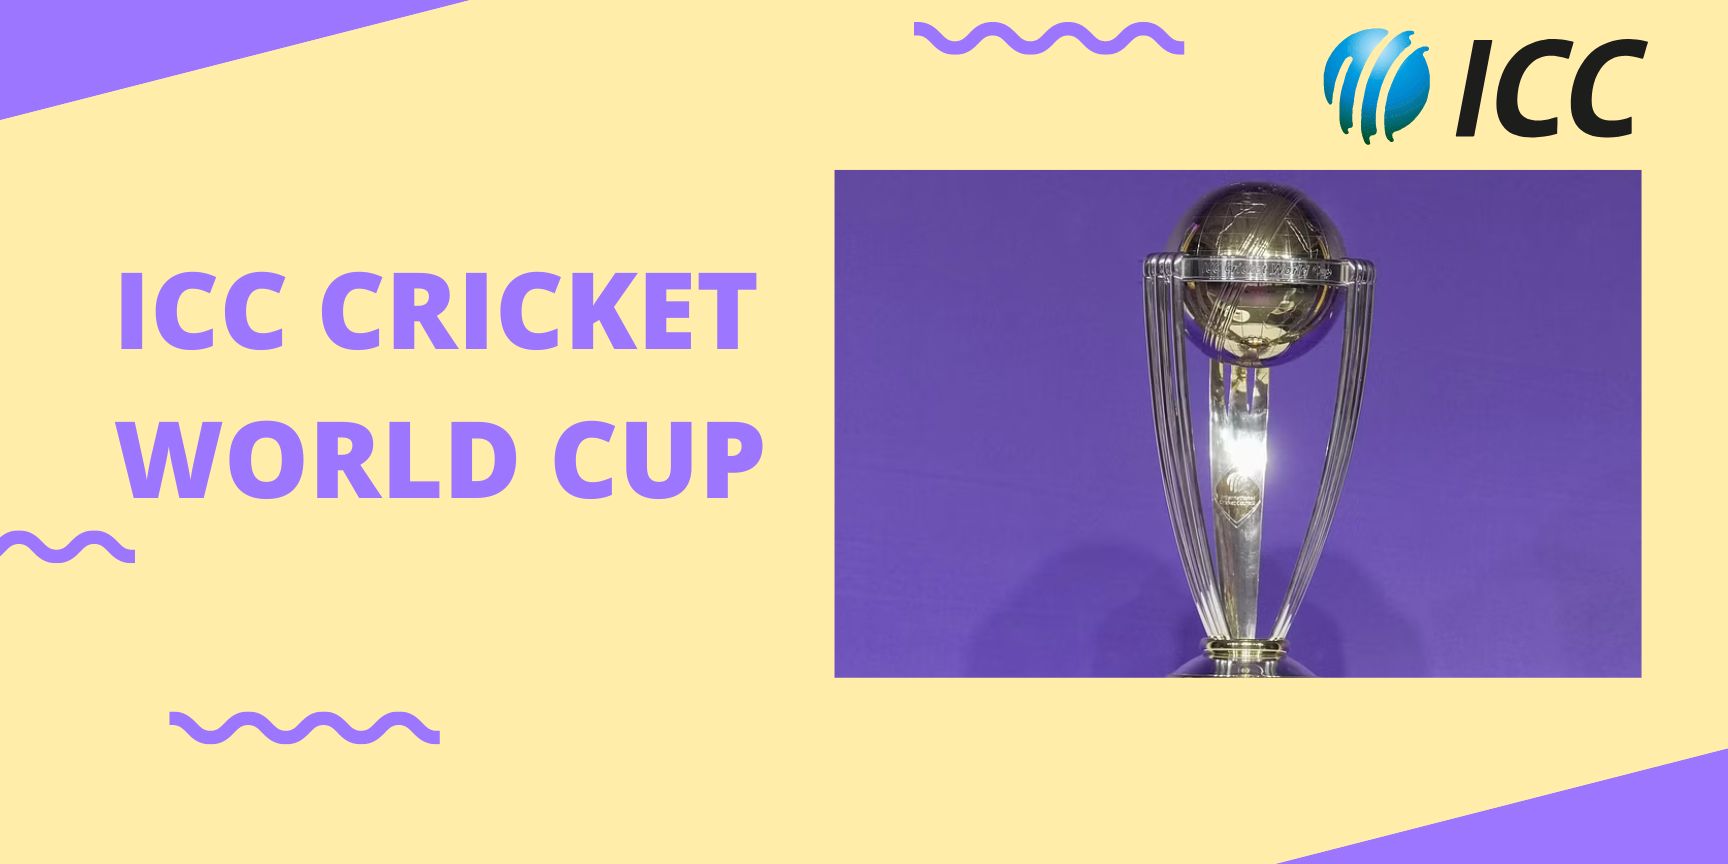 ICC Cricket World Cup features overview and news